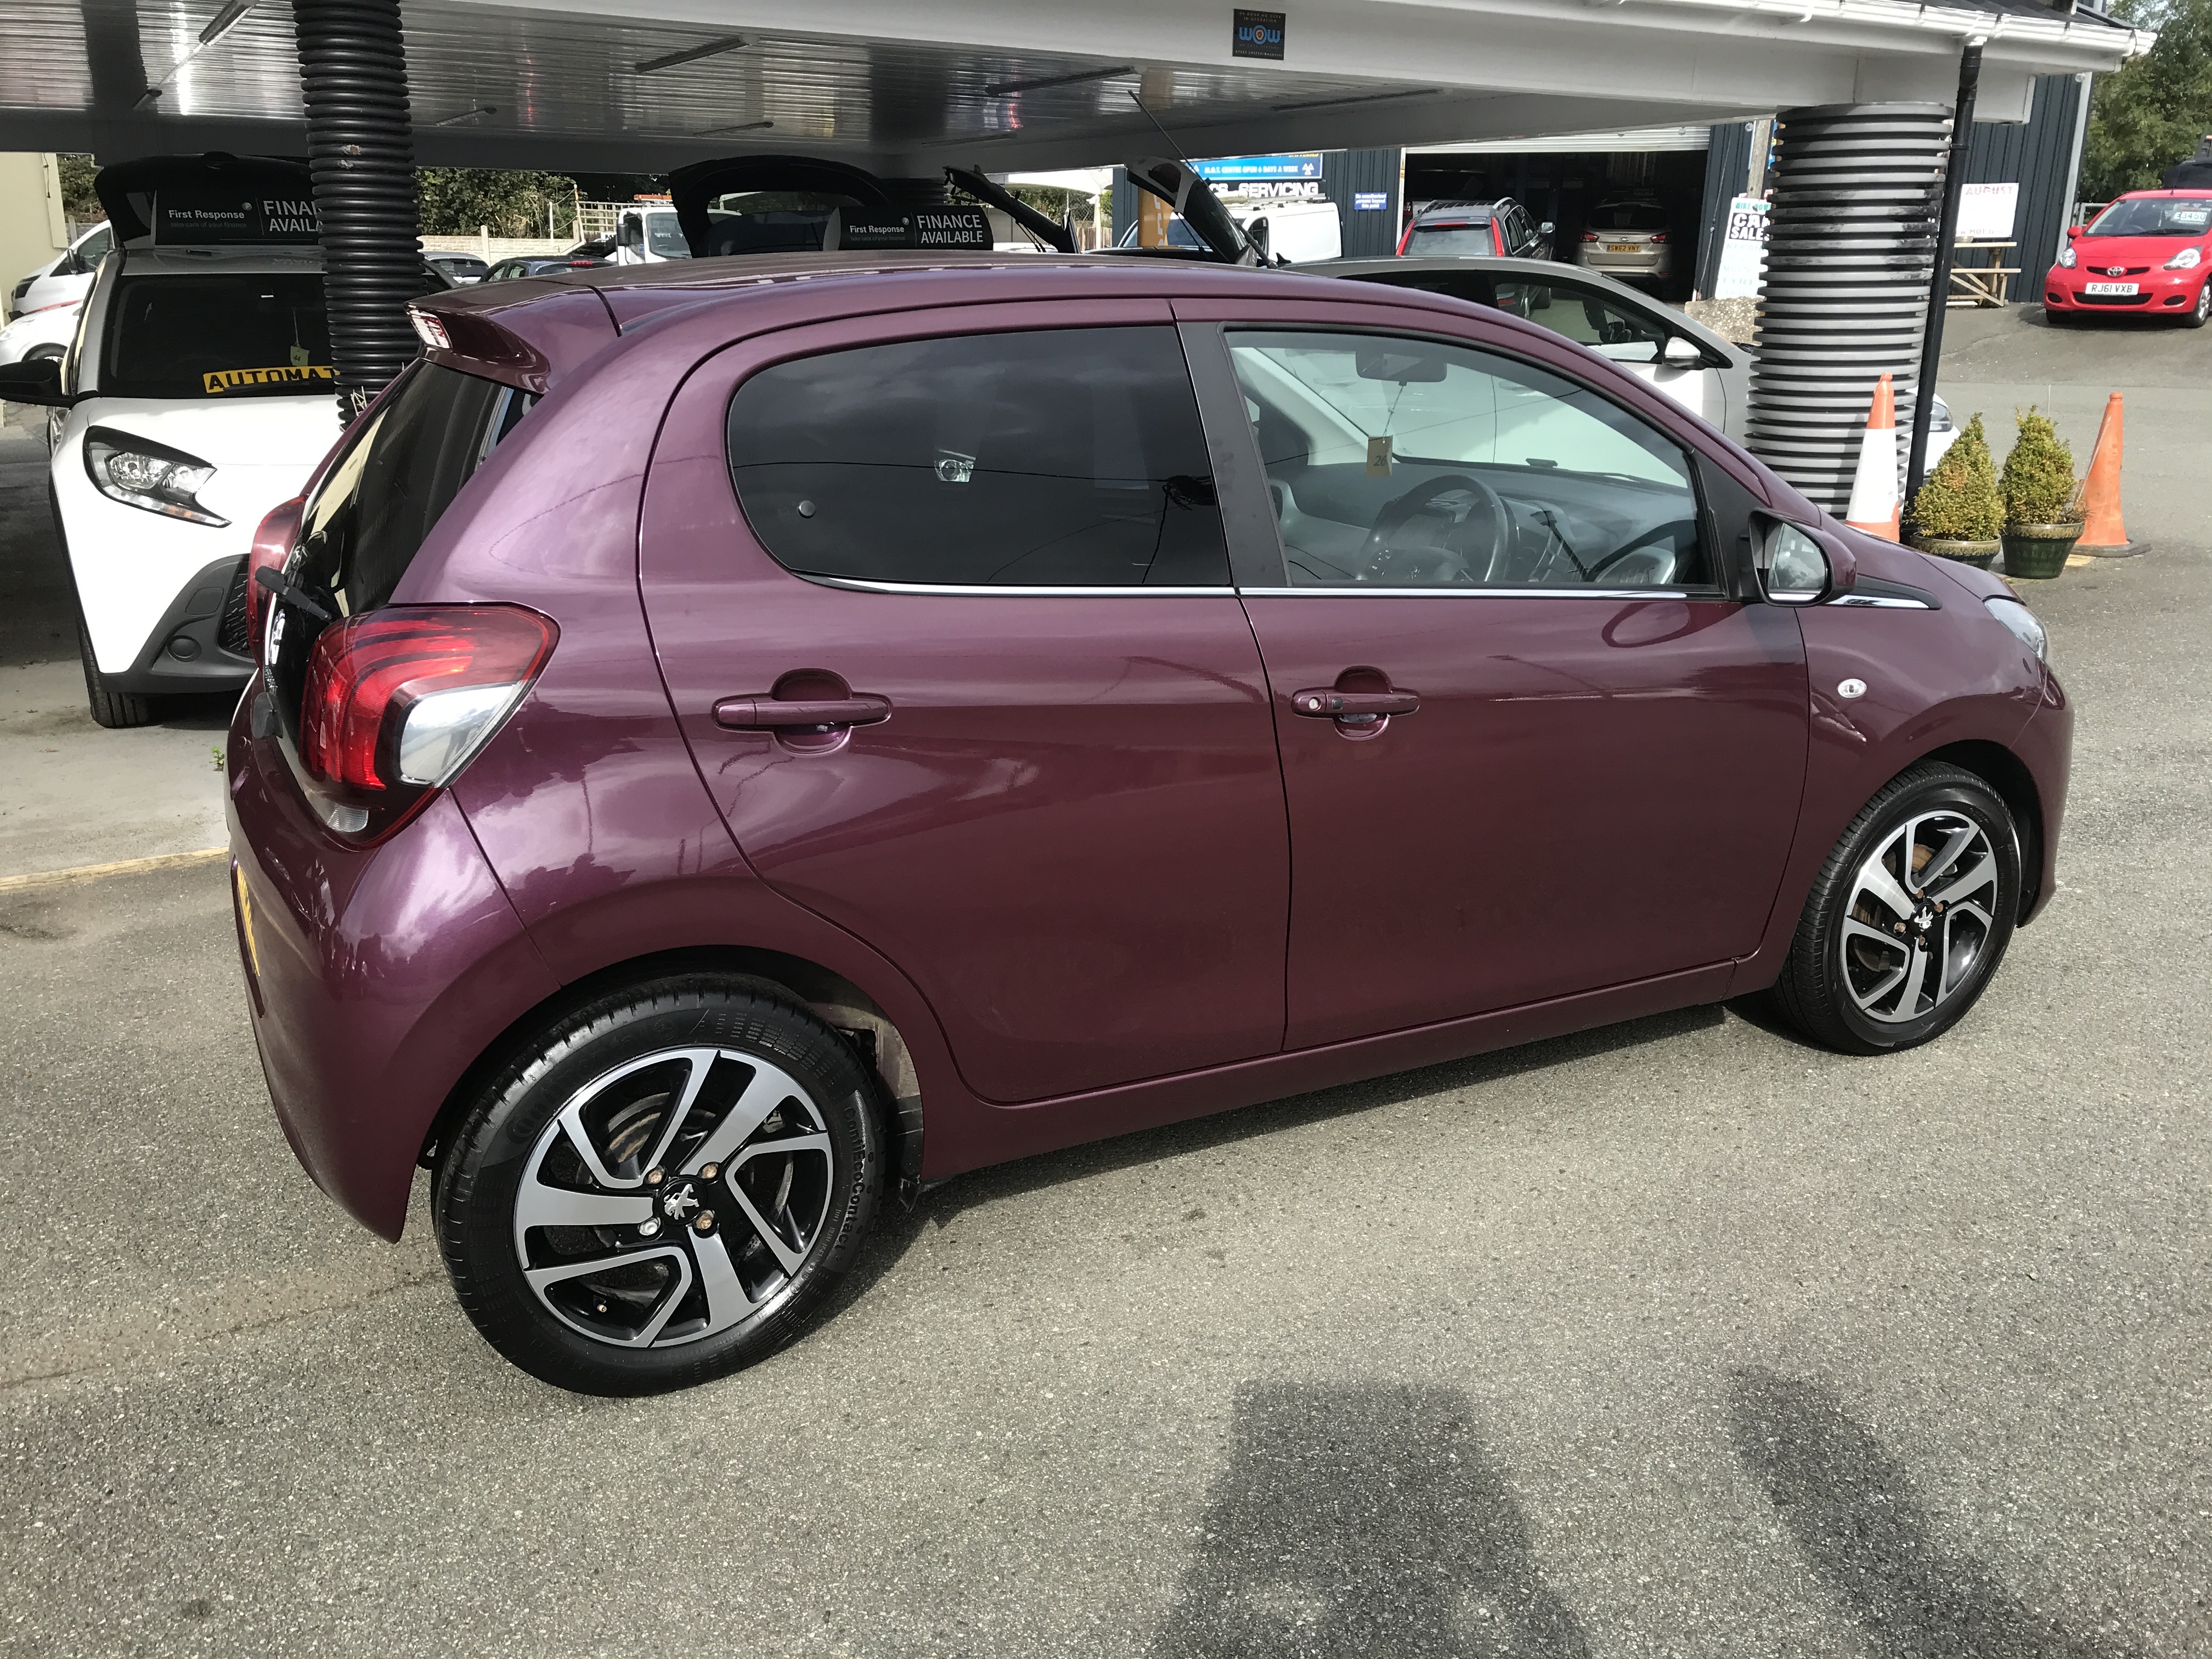 Peugeot 108 ALLURE for sale at Mike Howlin Motor Sales Pembrokeshire